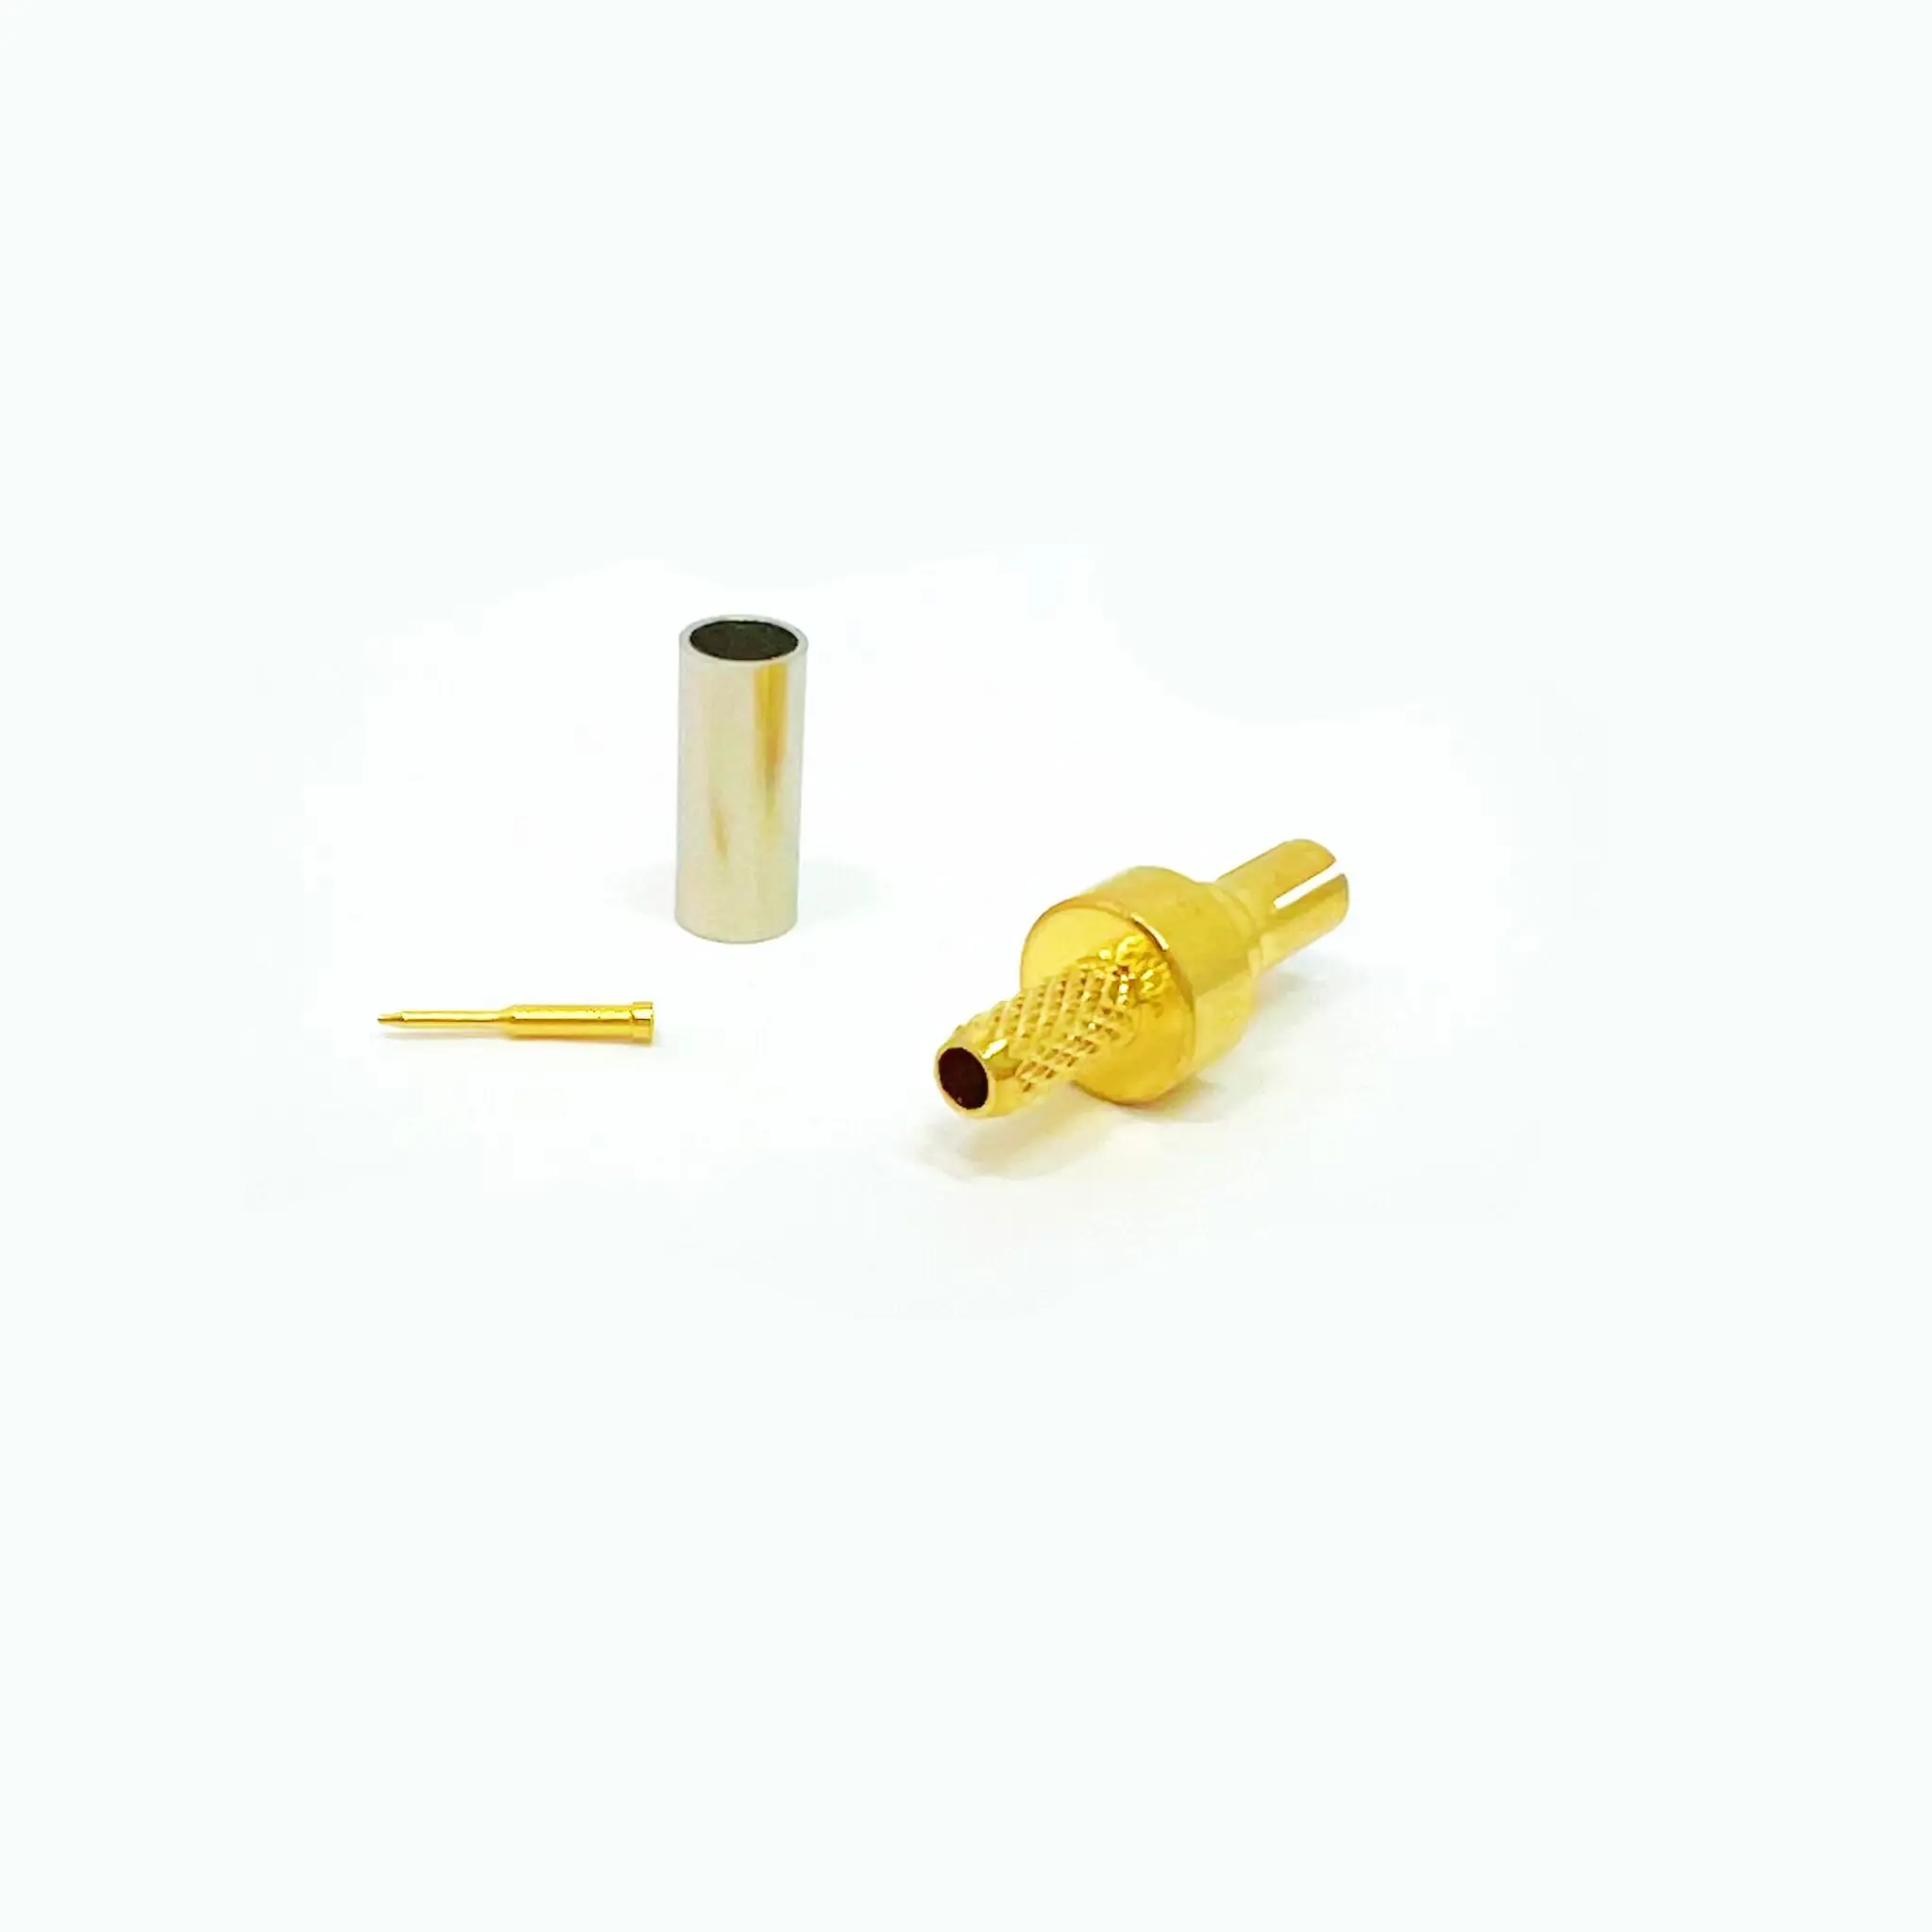 Gold plated RF TS9 male plug for rg316 rg174 lmr100 cable straight rf coaxial connector details